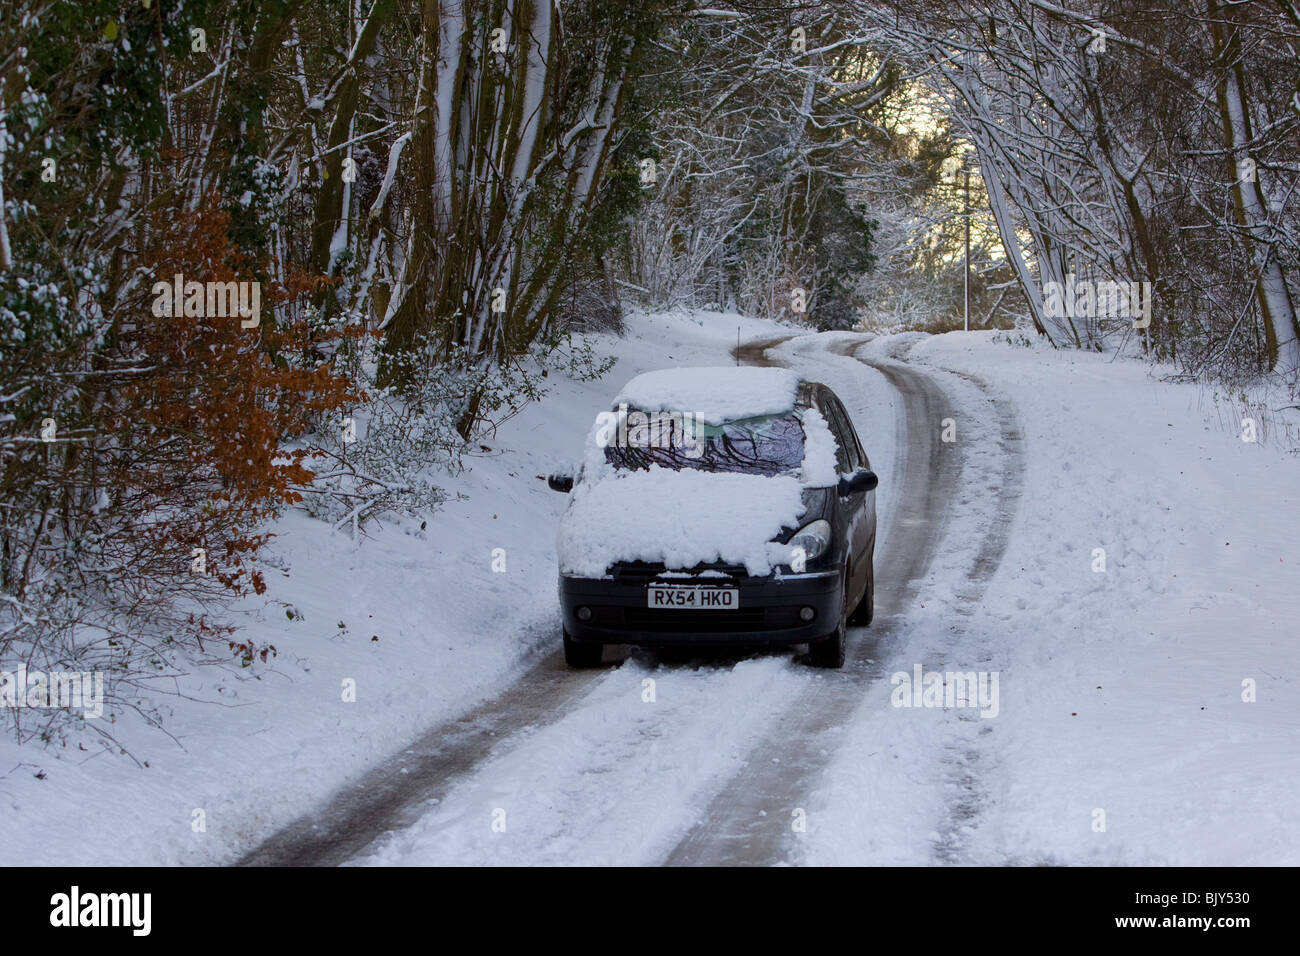 Snowy drive snow winter driving dangerous conditions Stock Photo